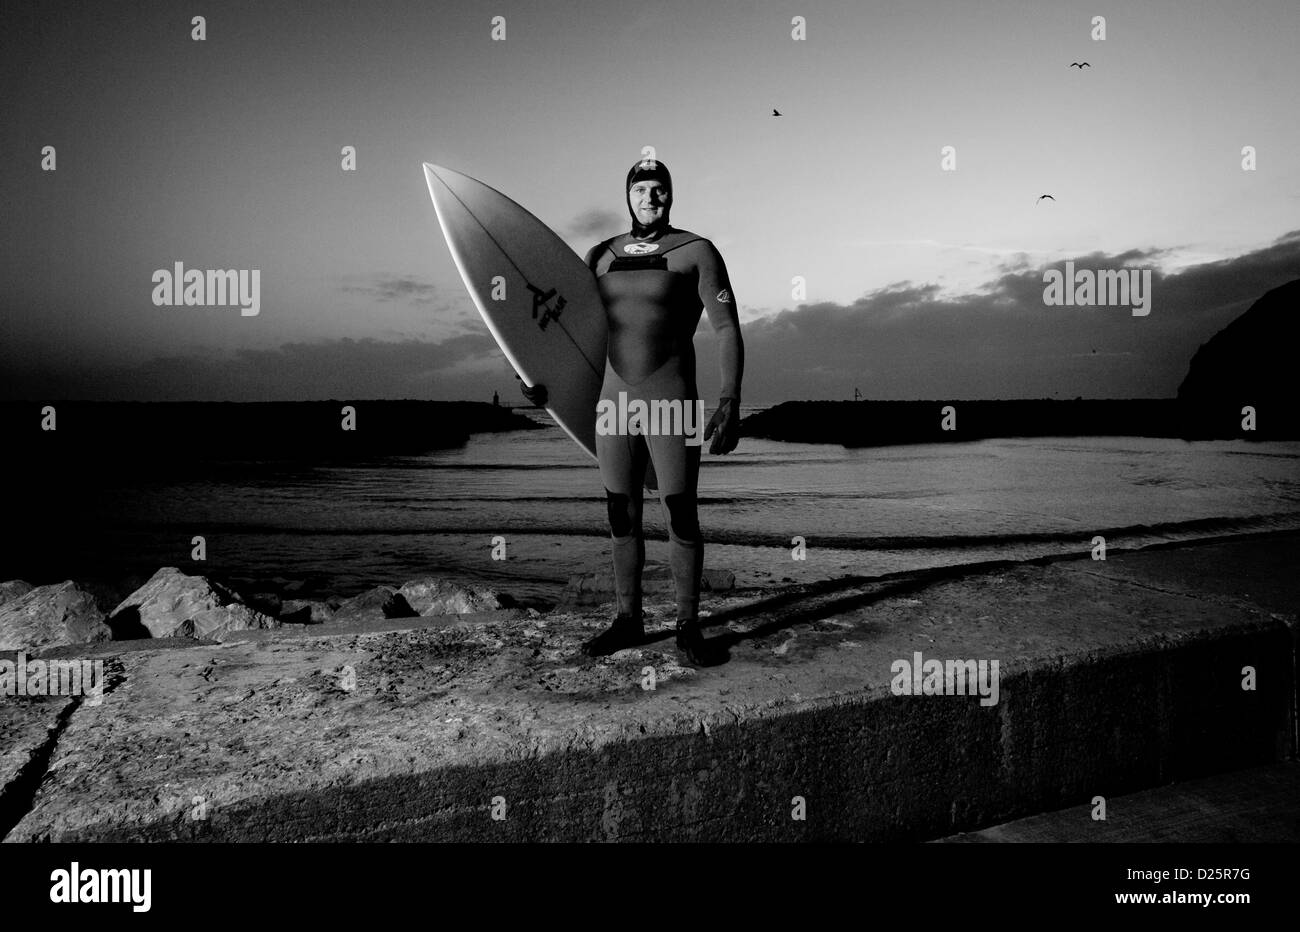 Surfer Robbie Hildreth prior to going for an early morning surf in North Yorkshire, England. Stock Photo